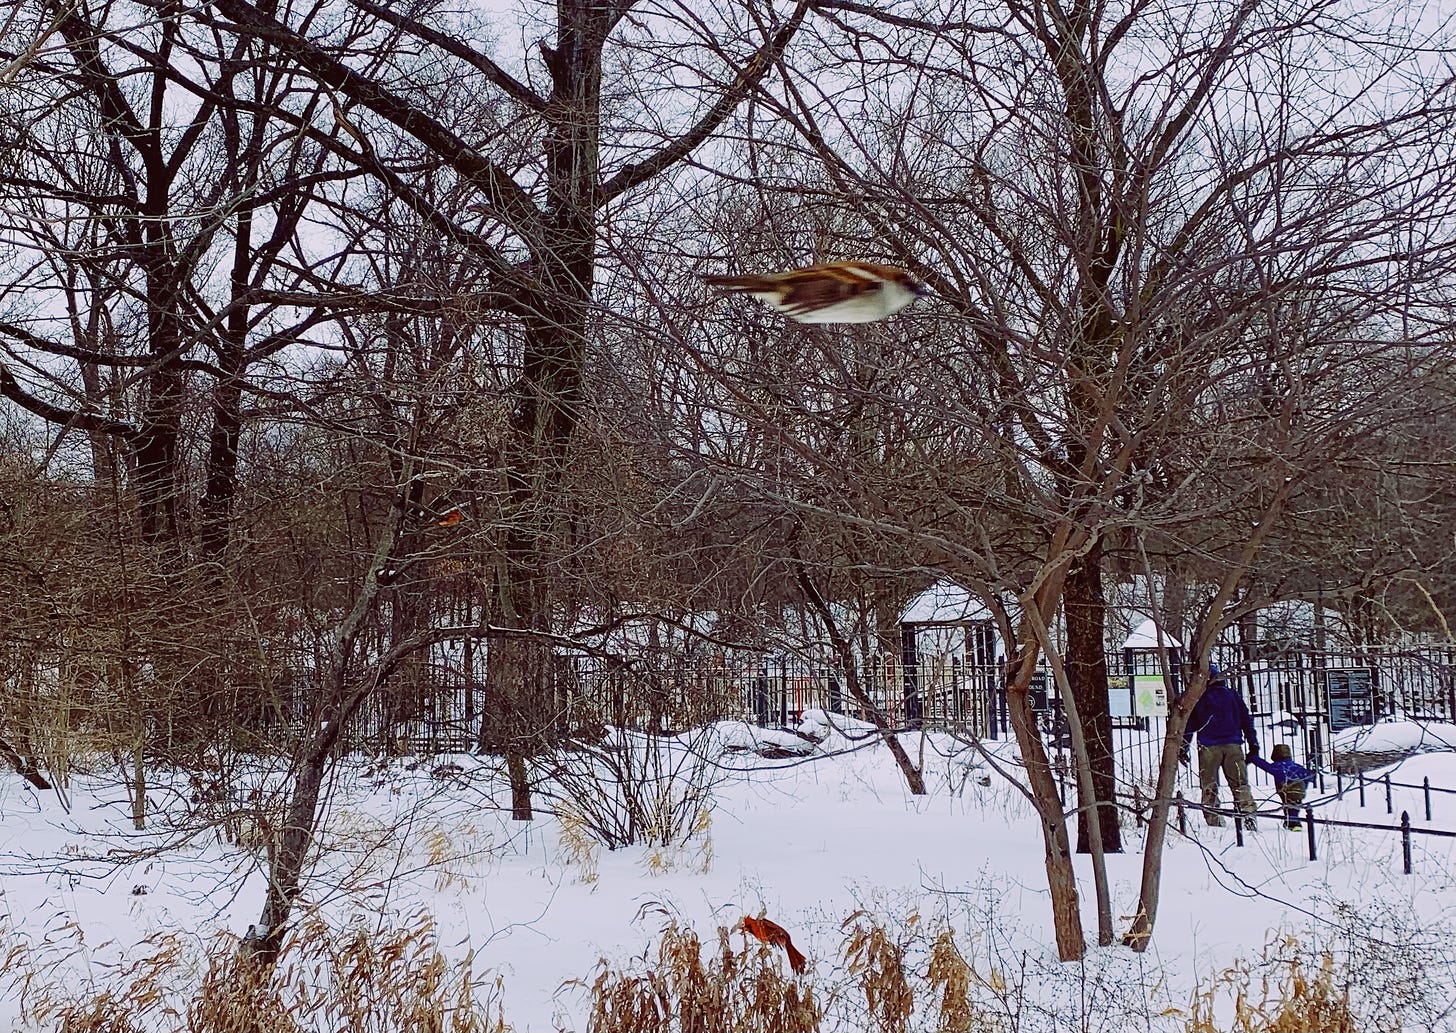 A brown and white bird is caught mid-flight, seemingly hanging in the air, on a wintry day in a park with father and son in distance